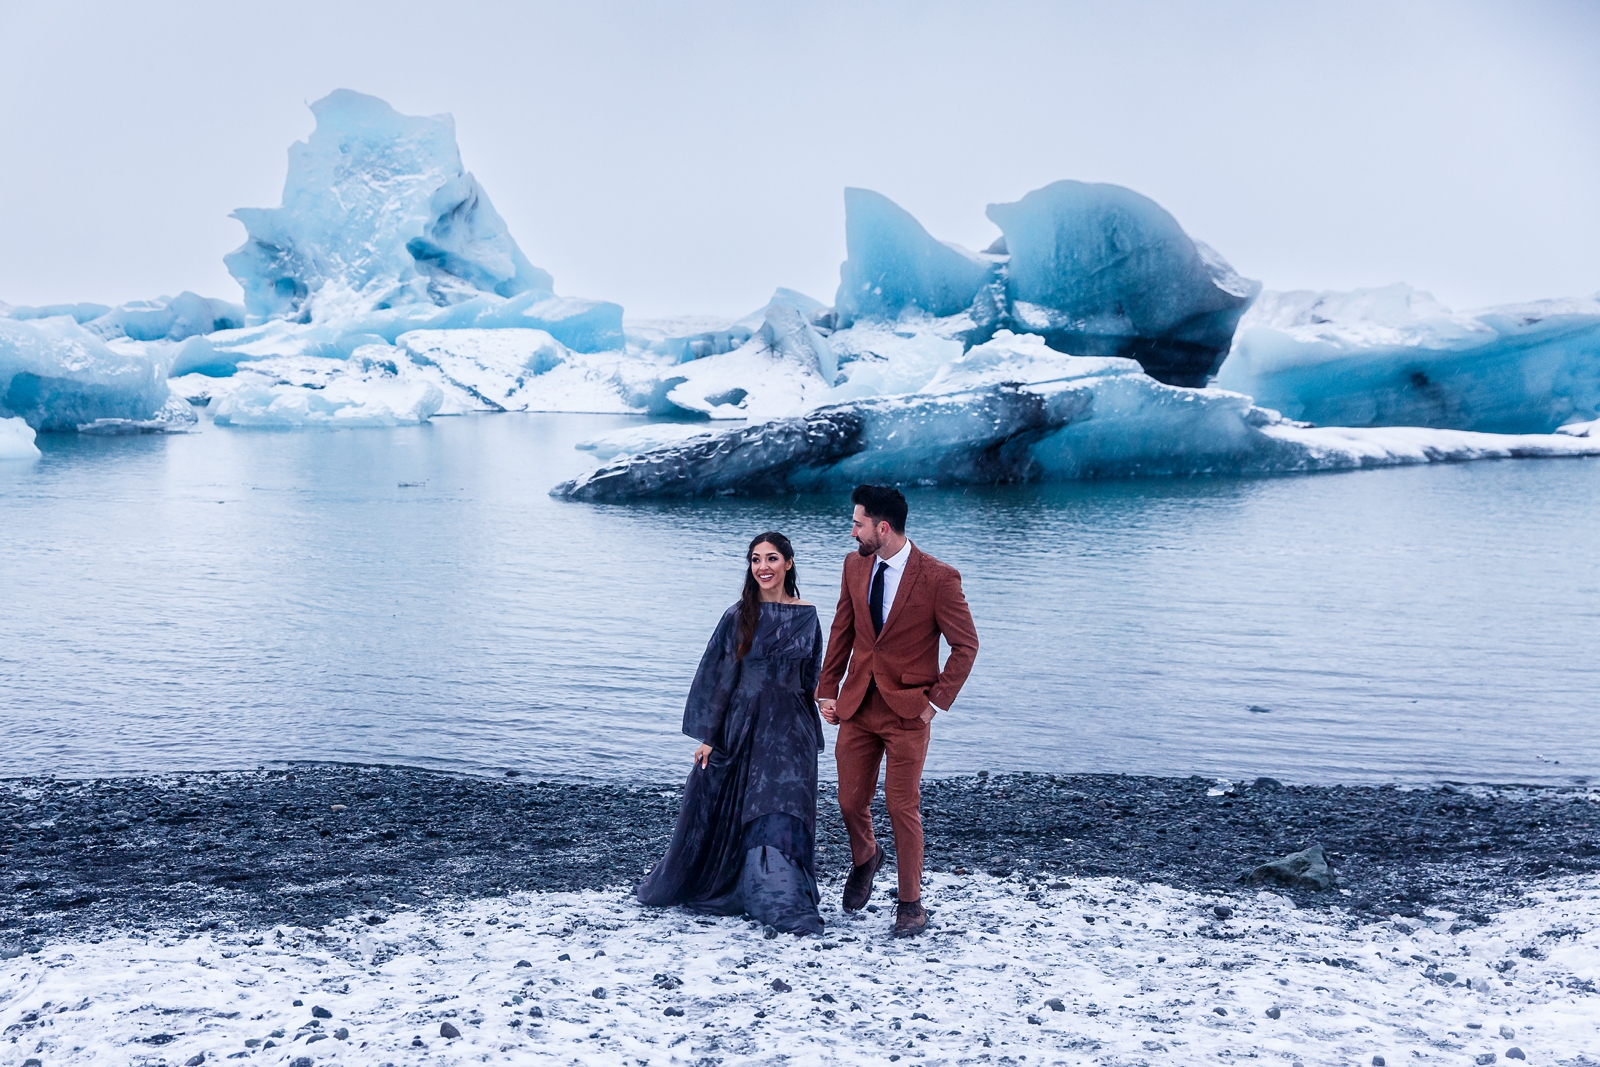 An eloping couple walks along the frigid glacier lagoon in Southern Iceland.